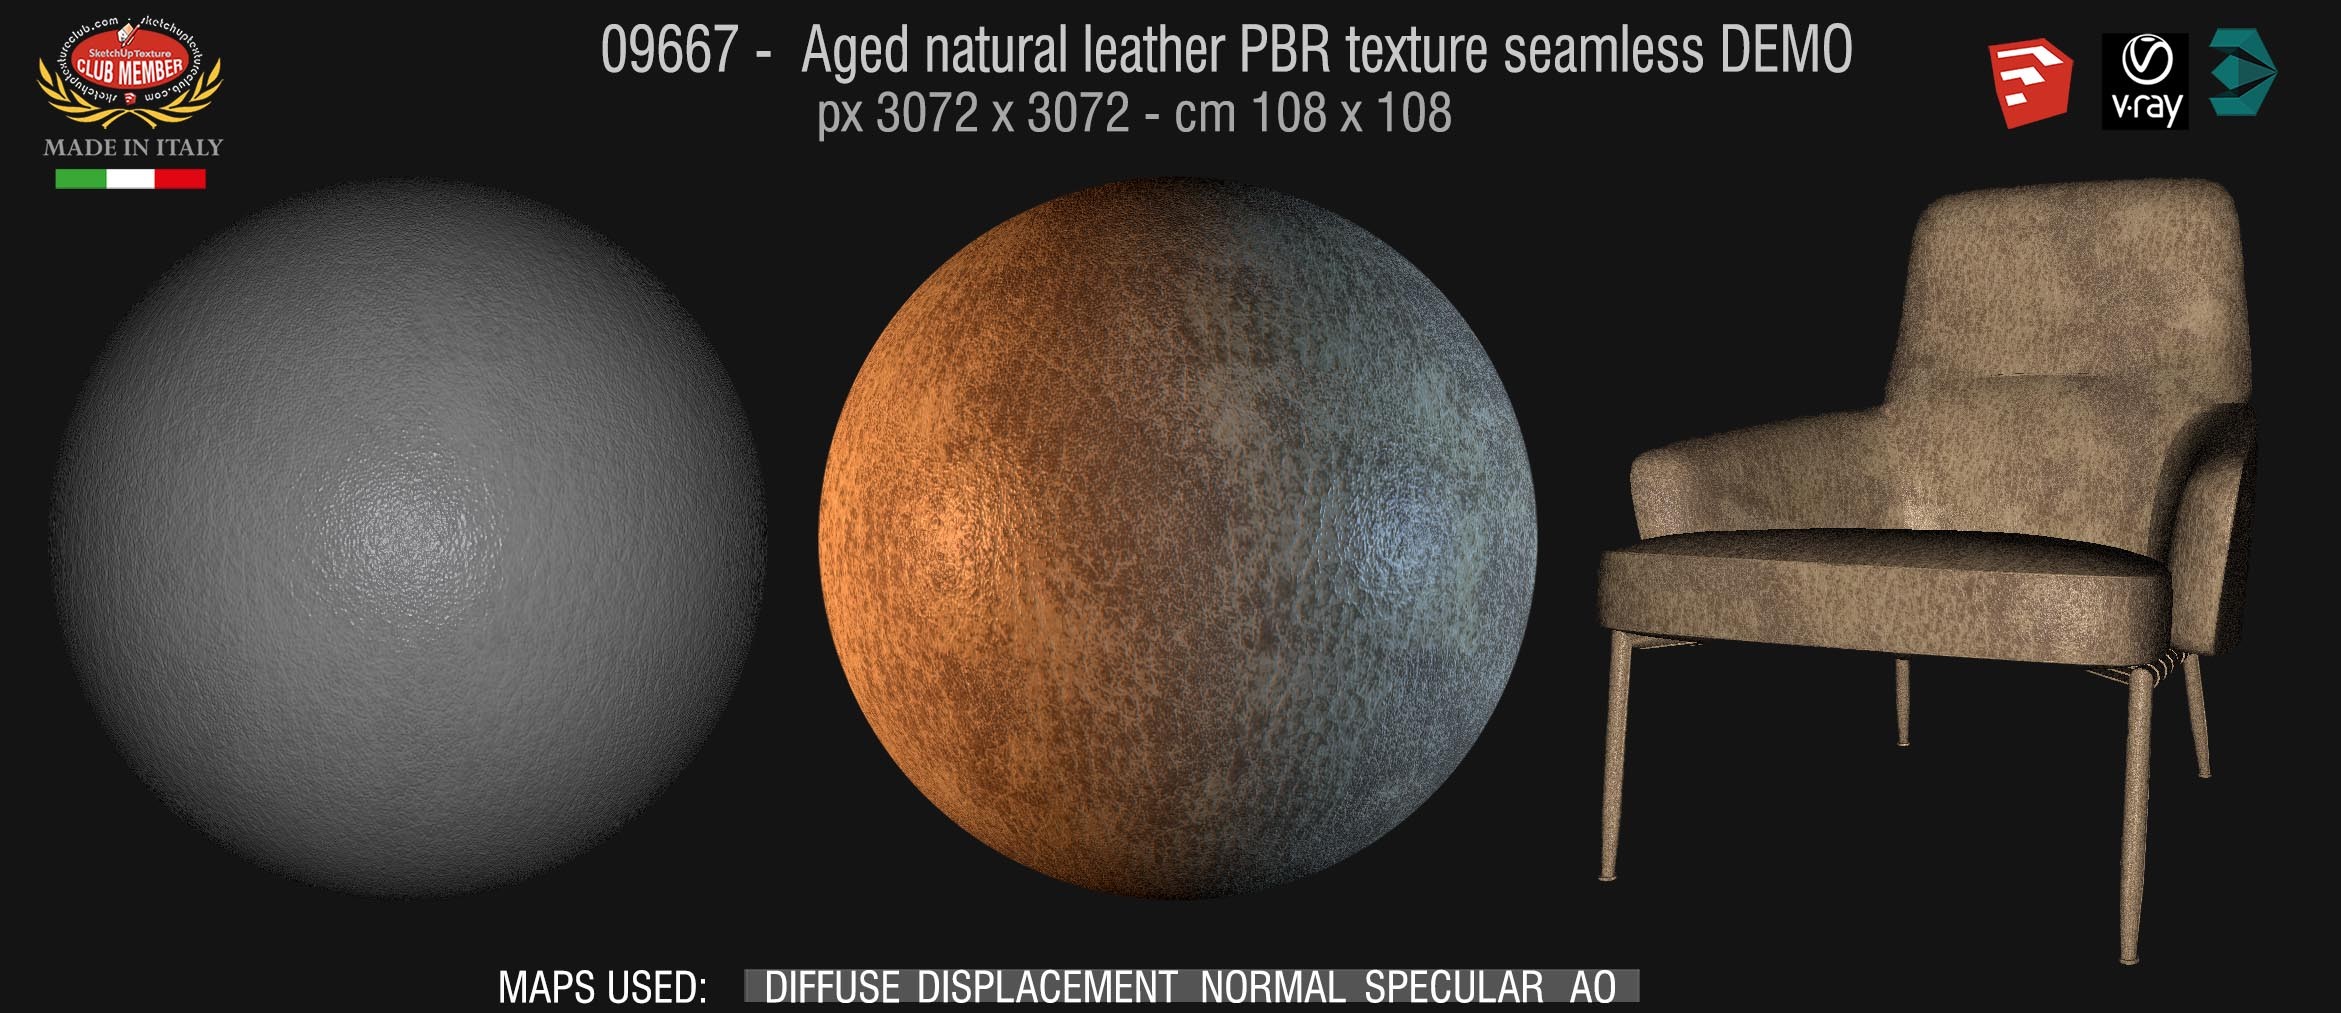 09667 Aged natural leather PBR texture seamless DEMO